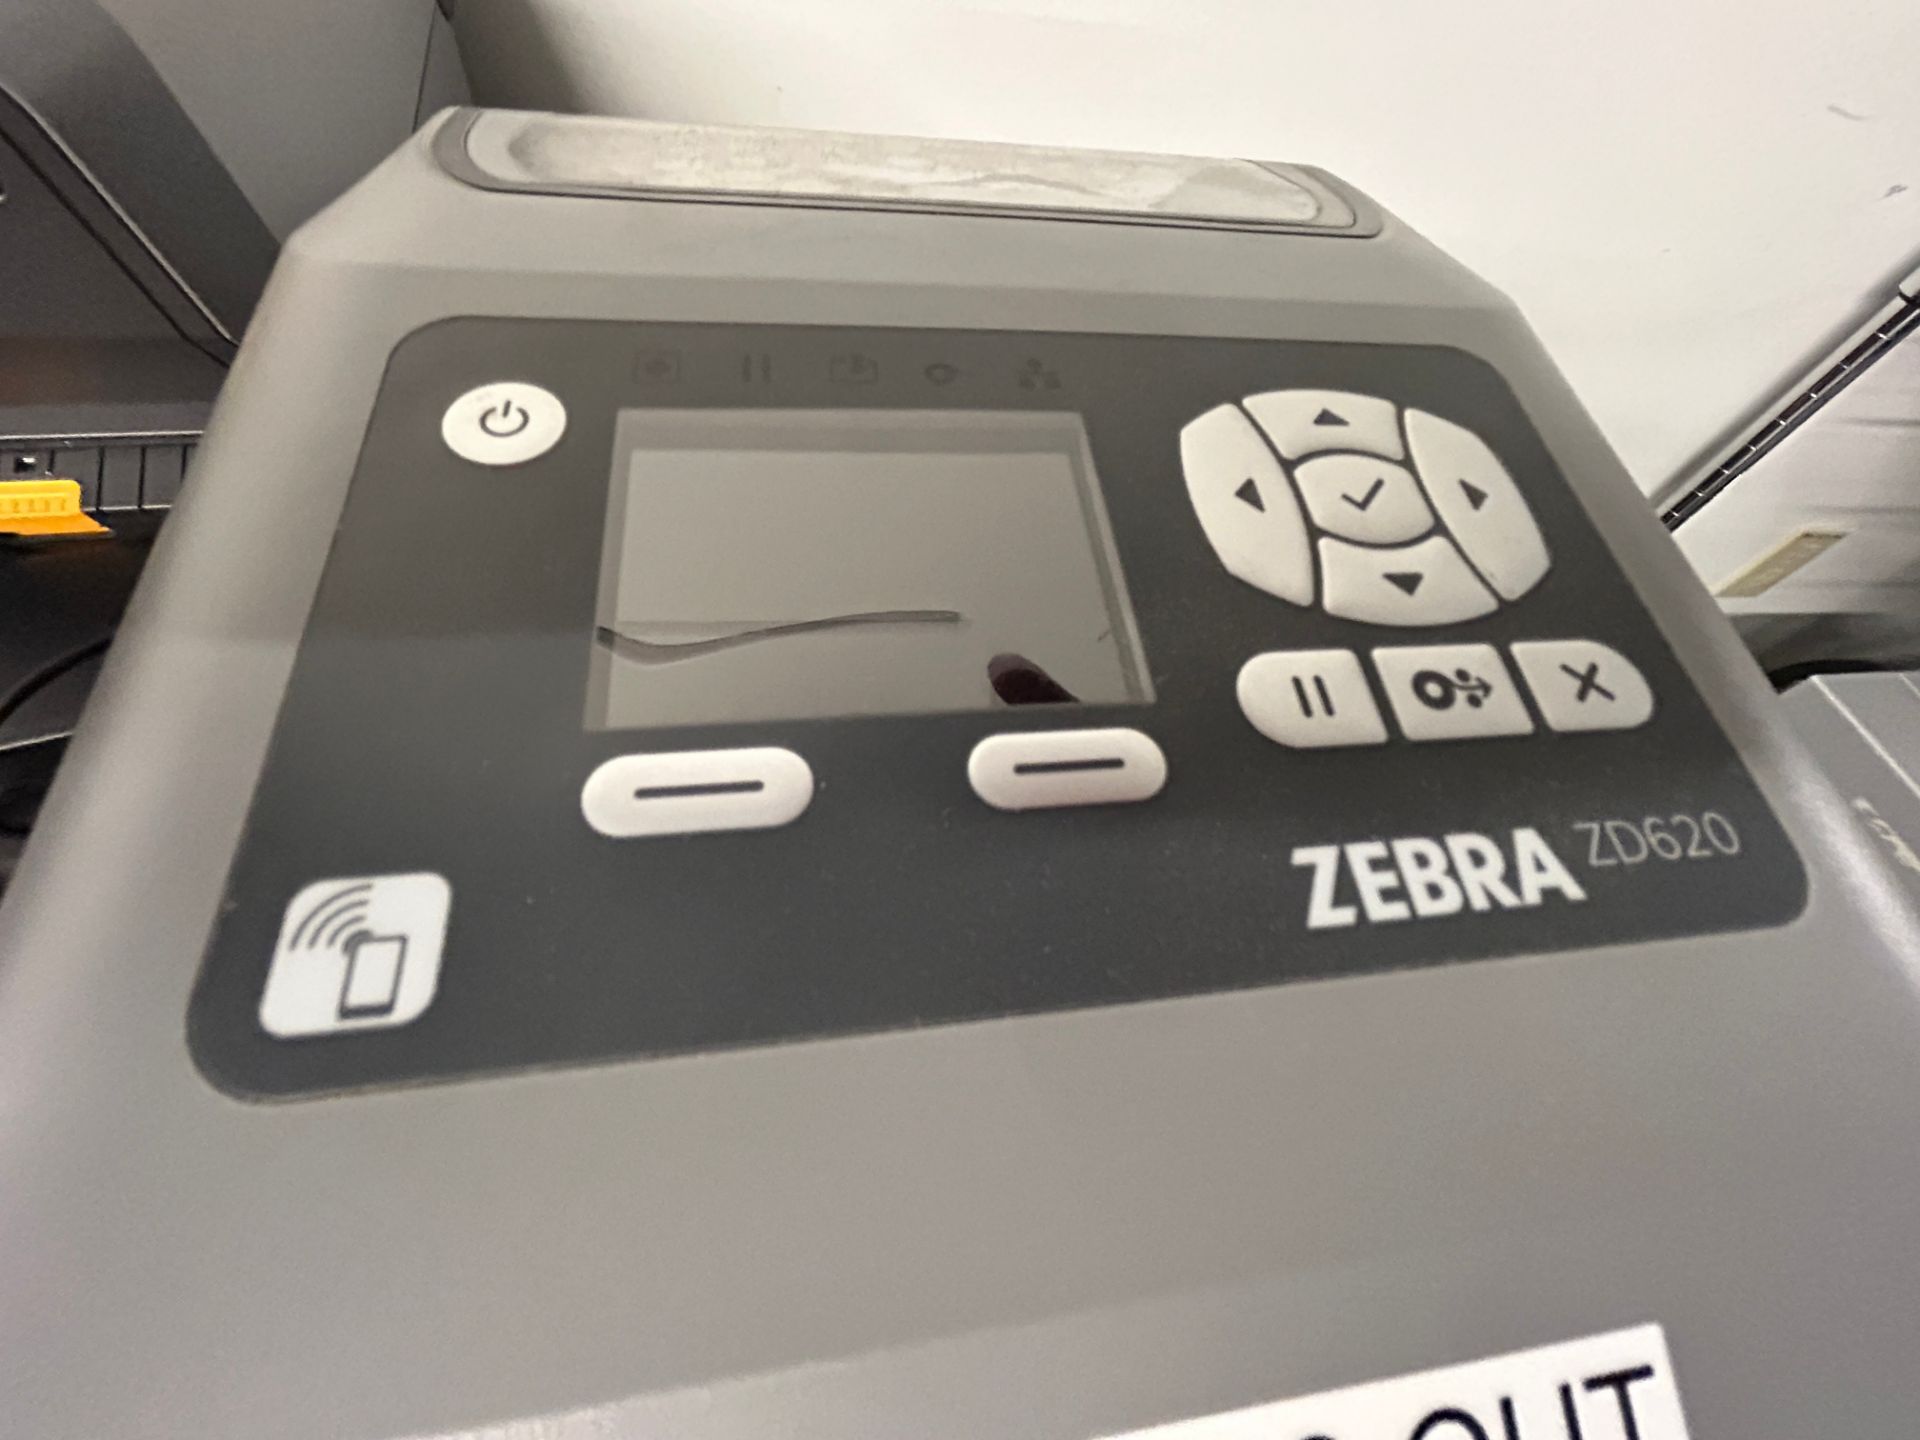 ZEBRA Mdl ZD620, Direct Thermal Label Printer, USB + Ethernet , Networkable, LCD Screen, 203 x 203 - Image 2 of 4